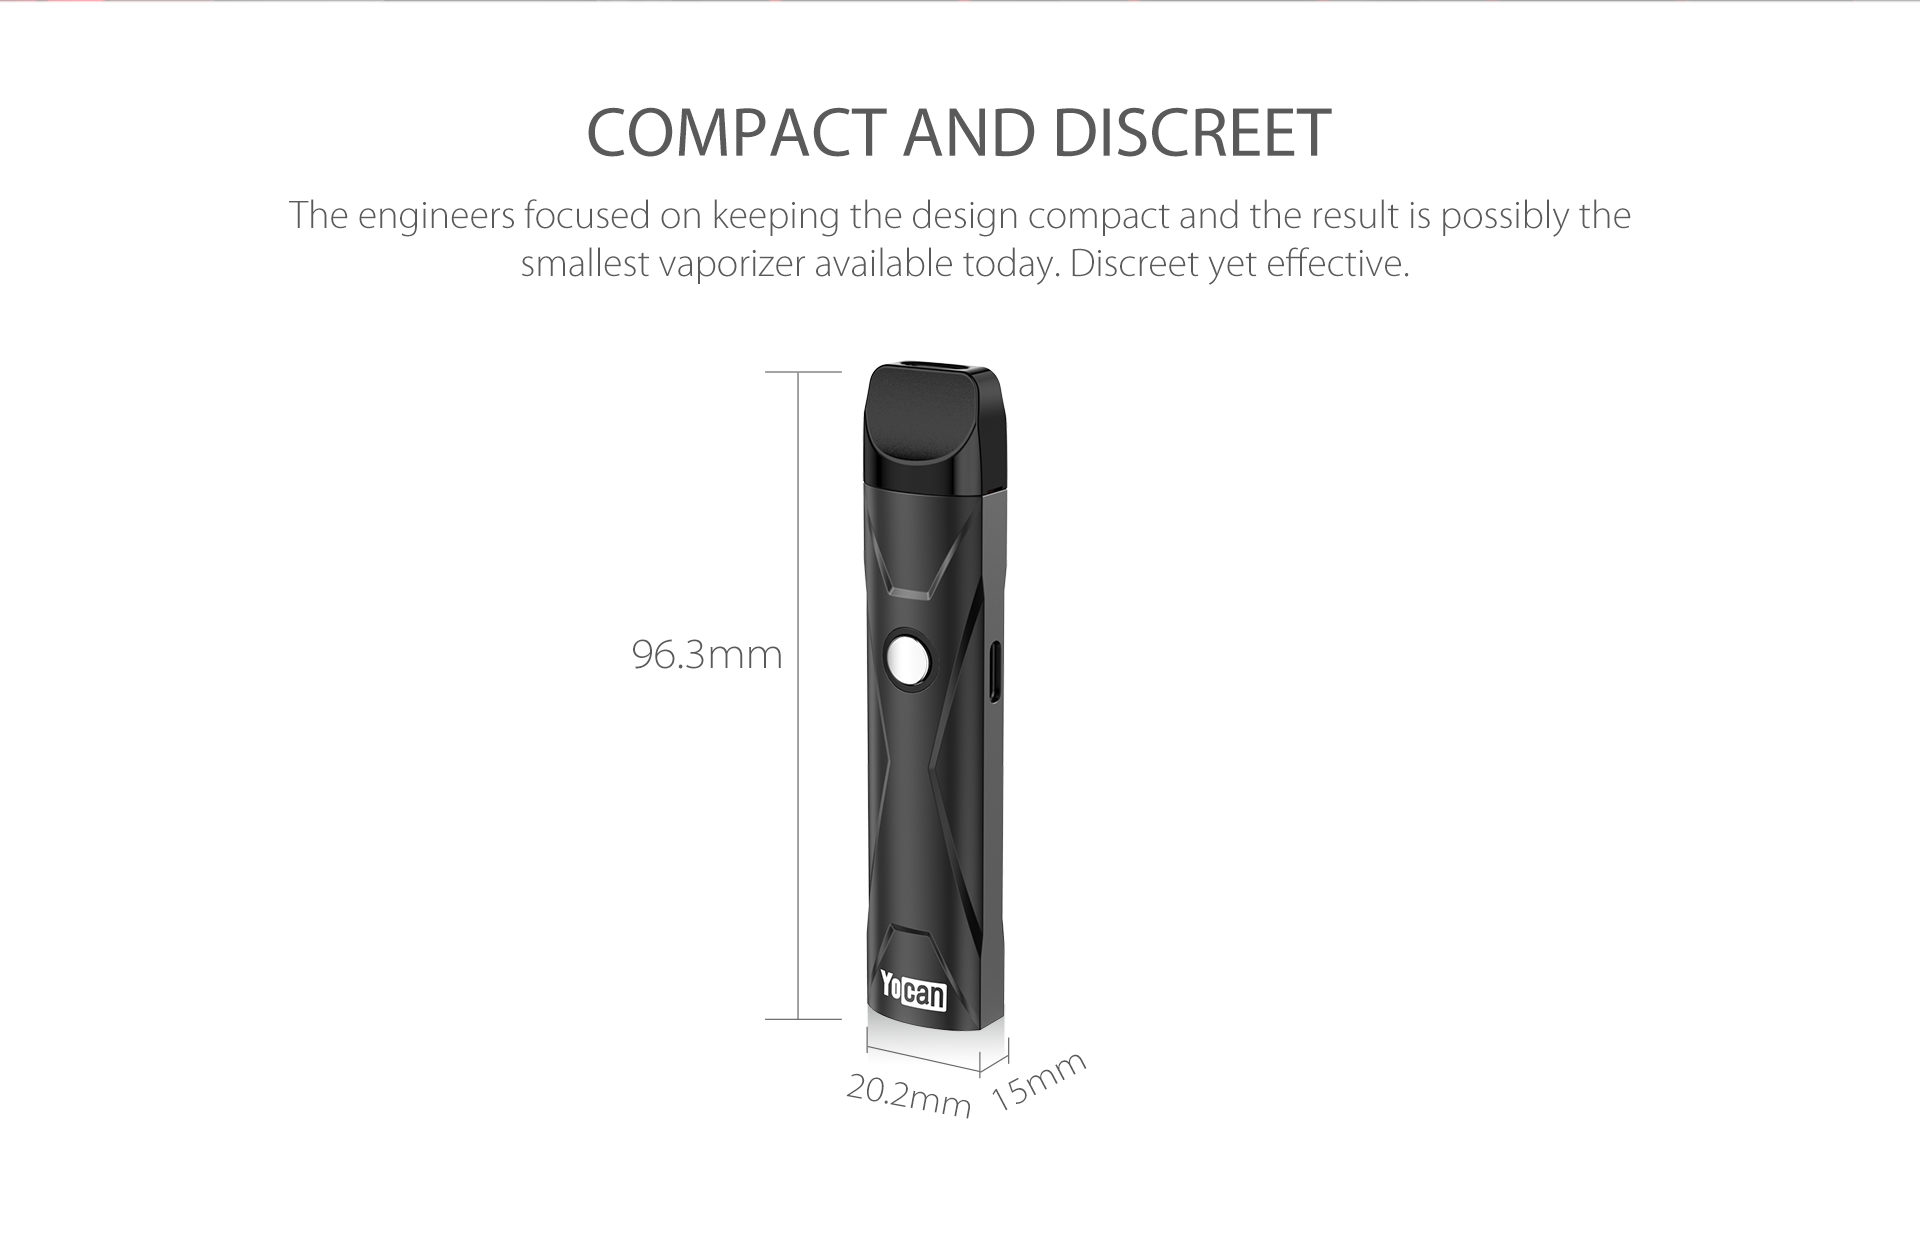 Yocan X Pod System is smallest vaporizer available today.